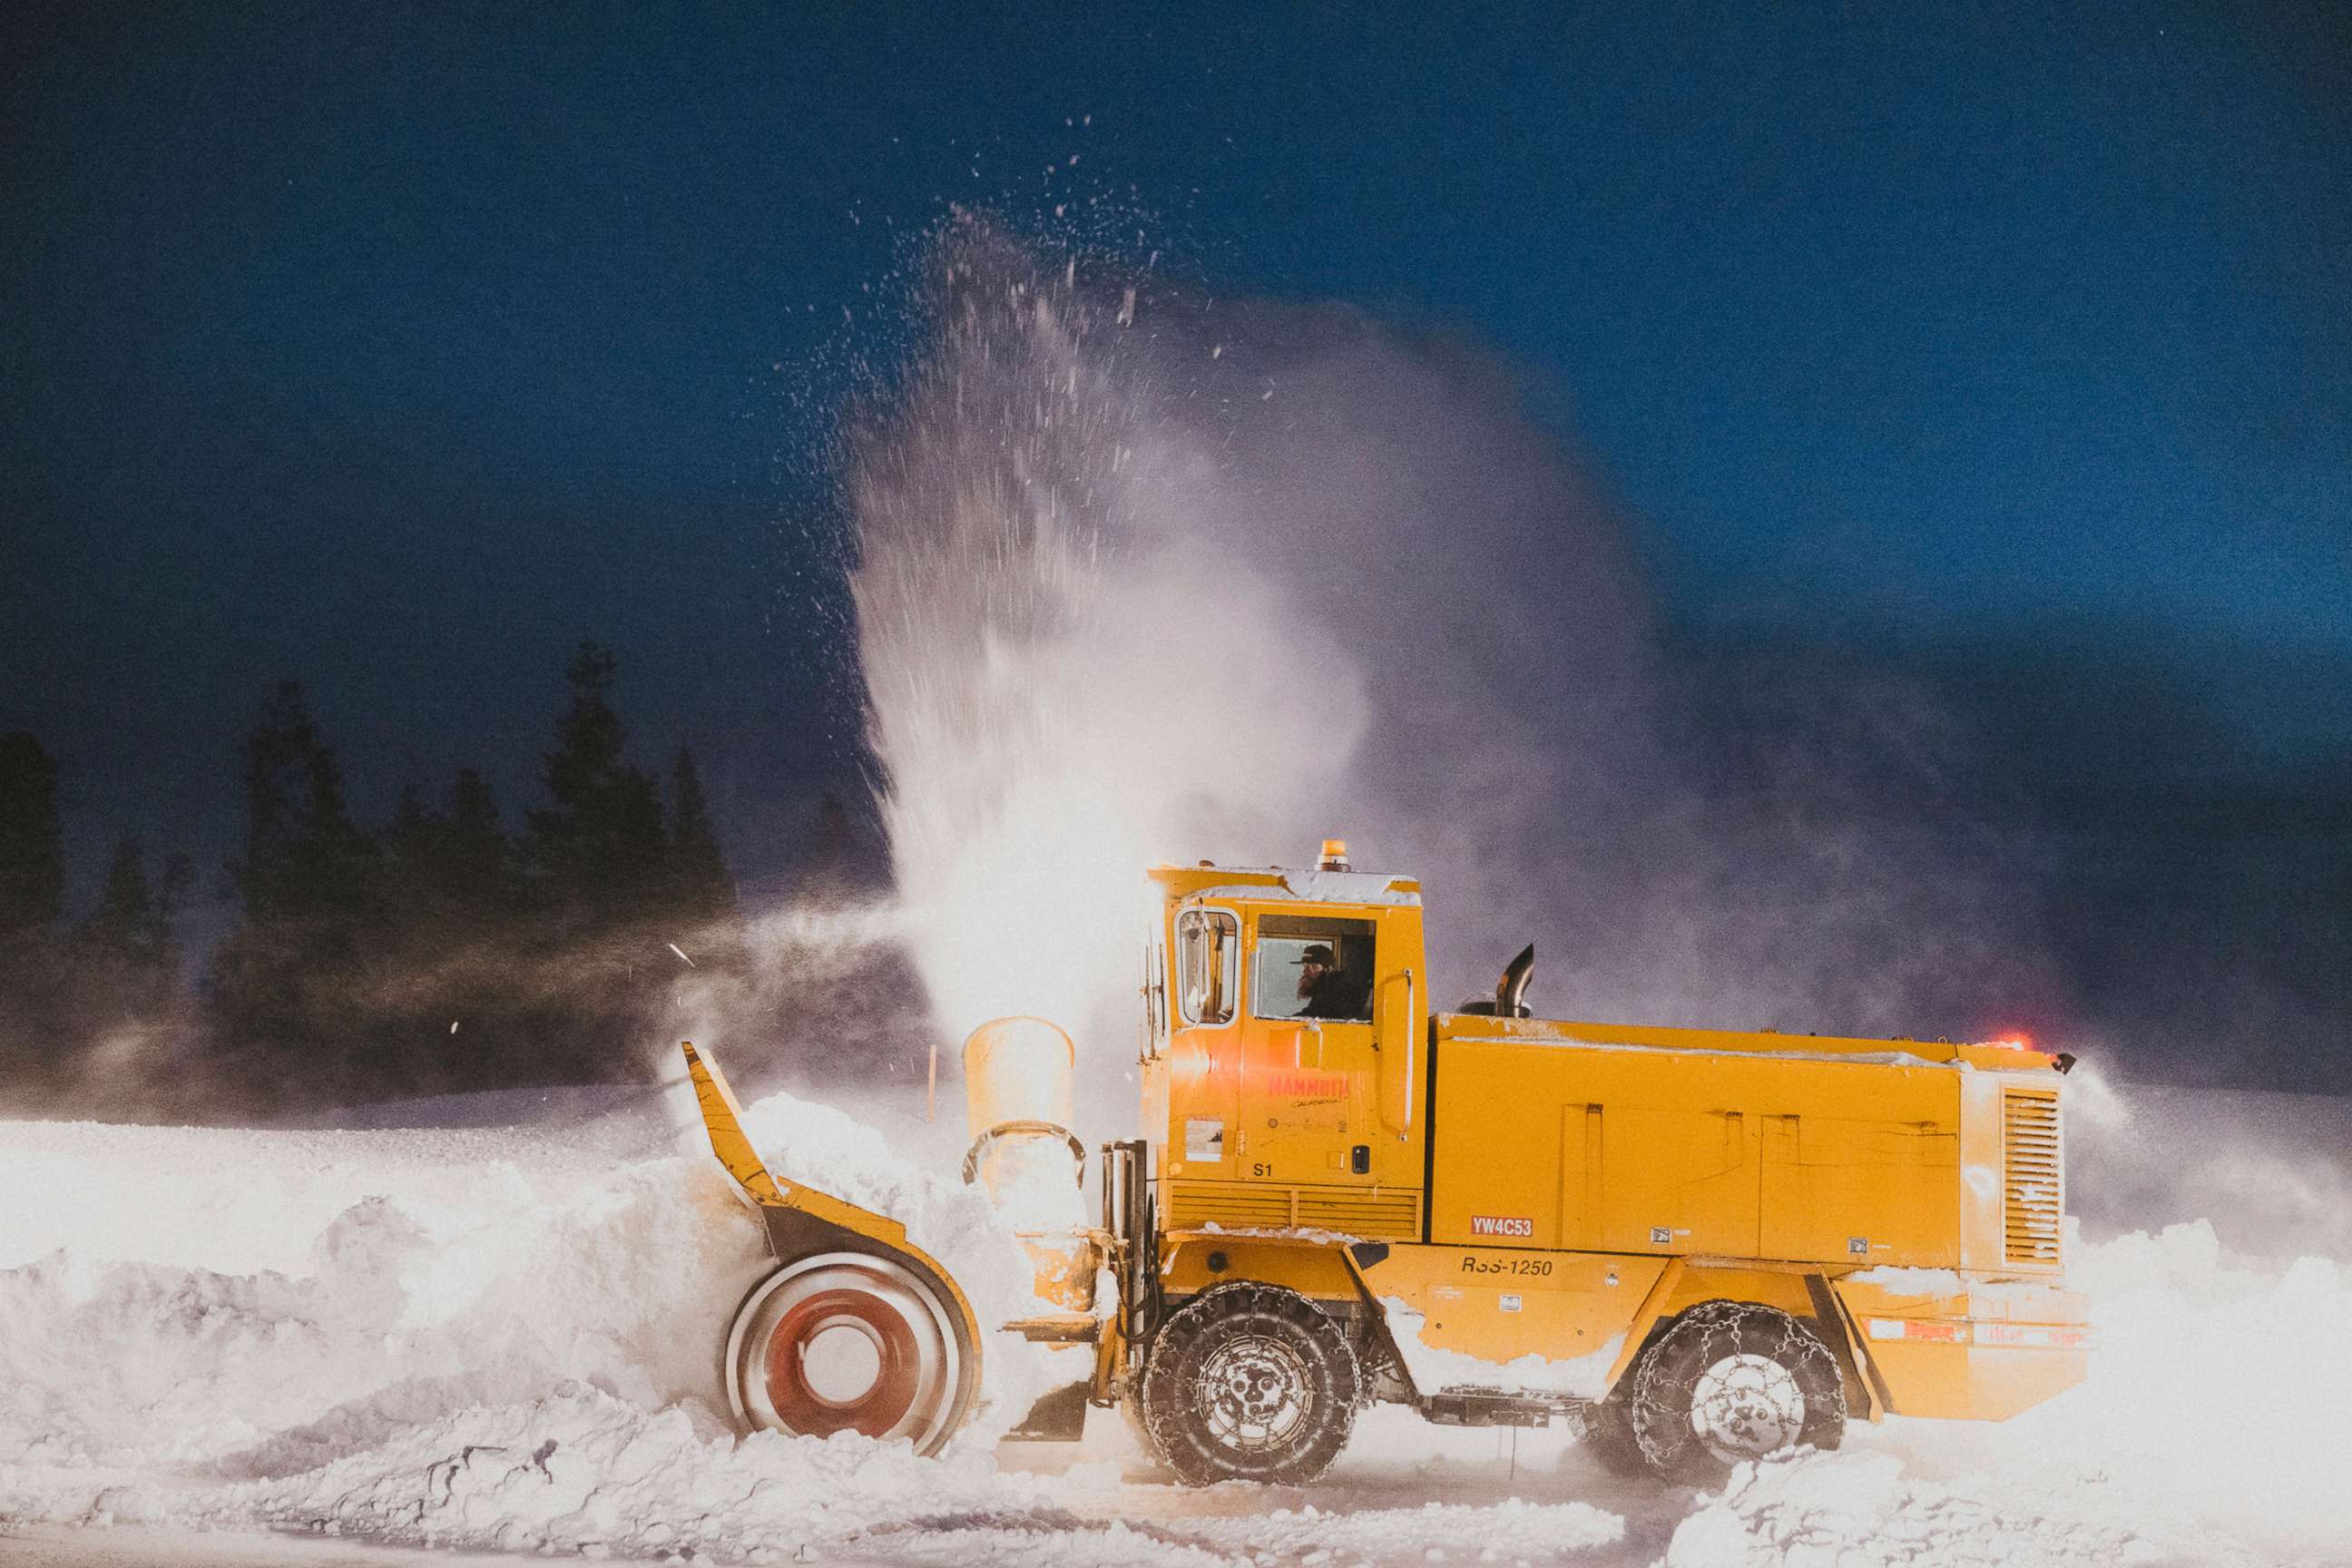 PHOTO: In this photo provided by Mammoth Mountain Ski Area, MMSA, a snow plower removes snow in Mammoth Mountain in Mammoth Lakes, Calif., Dec. 15, 2021.